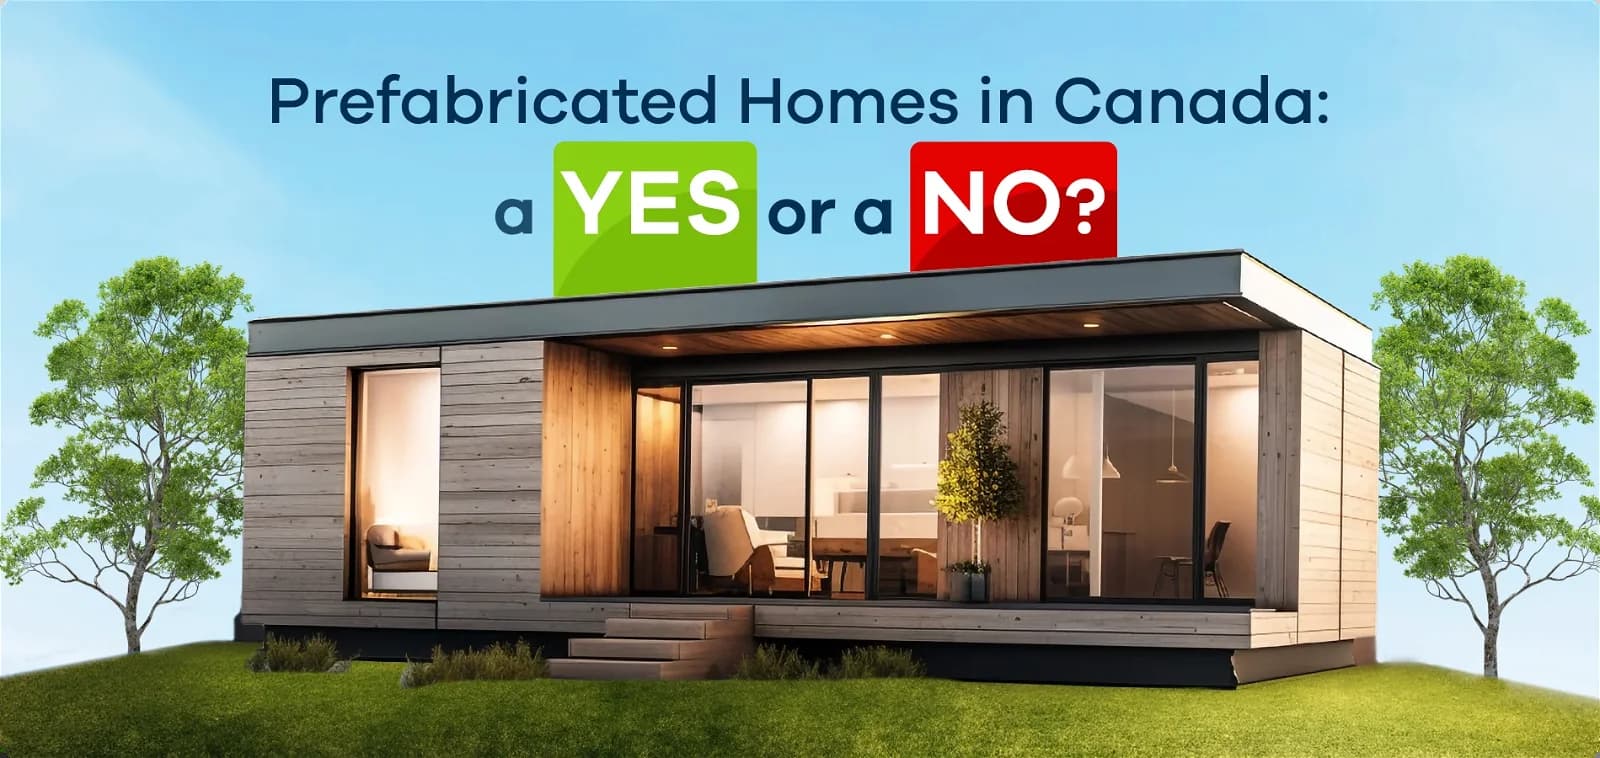 Prefab Homes in Canada: Who Should Buy One Who Should Not?